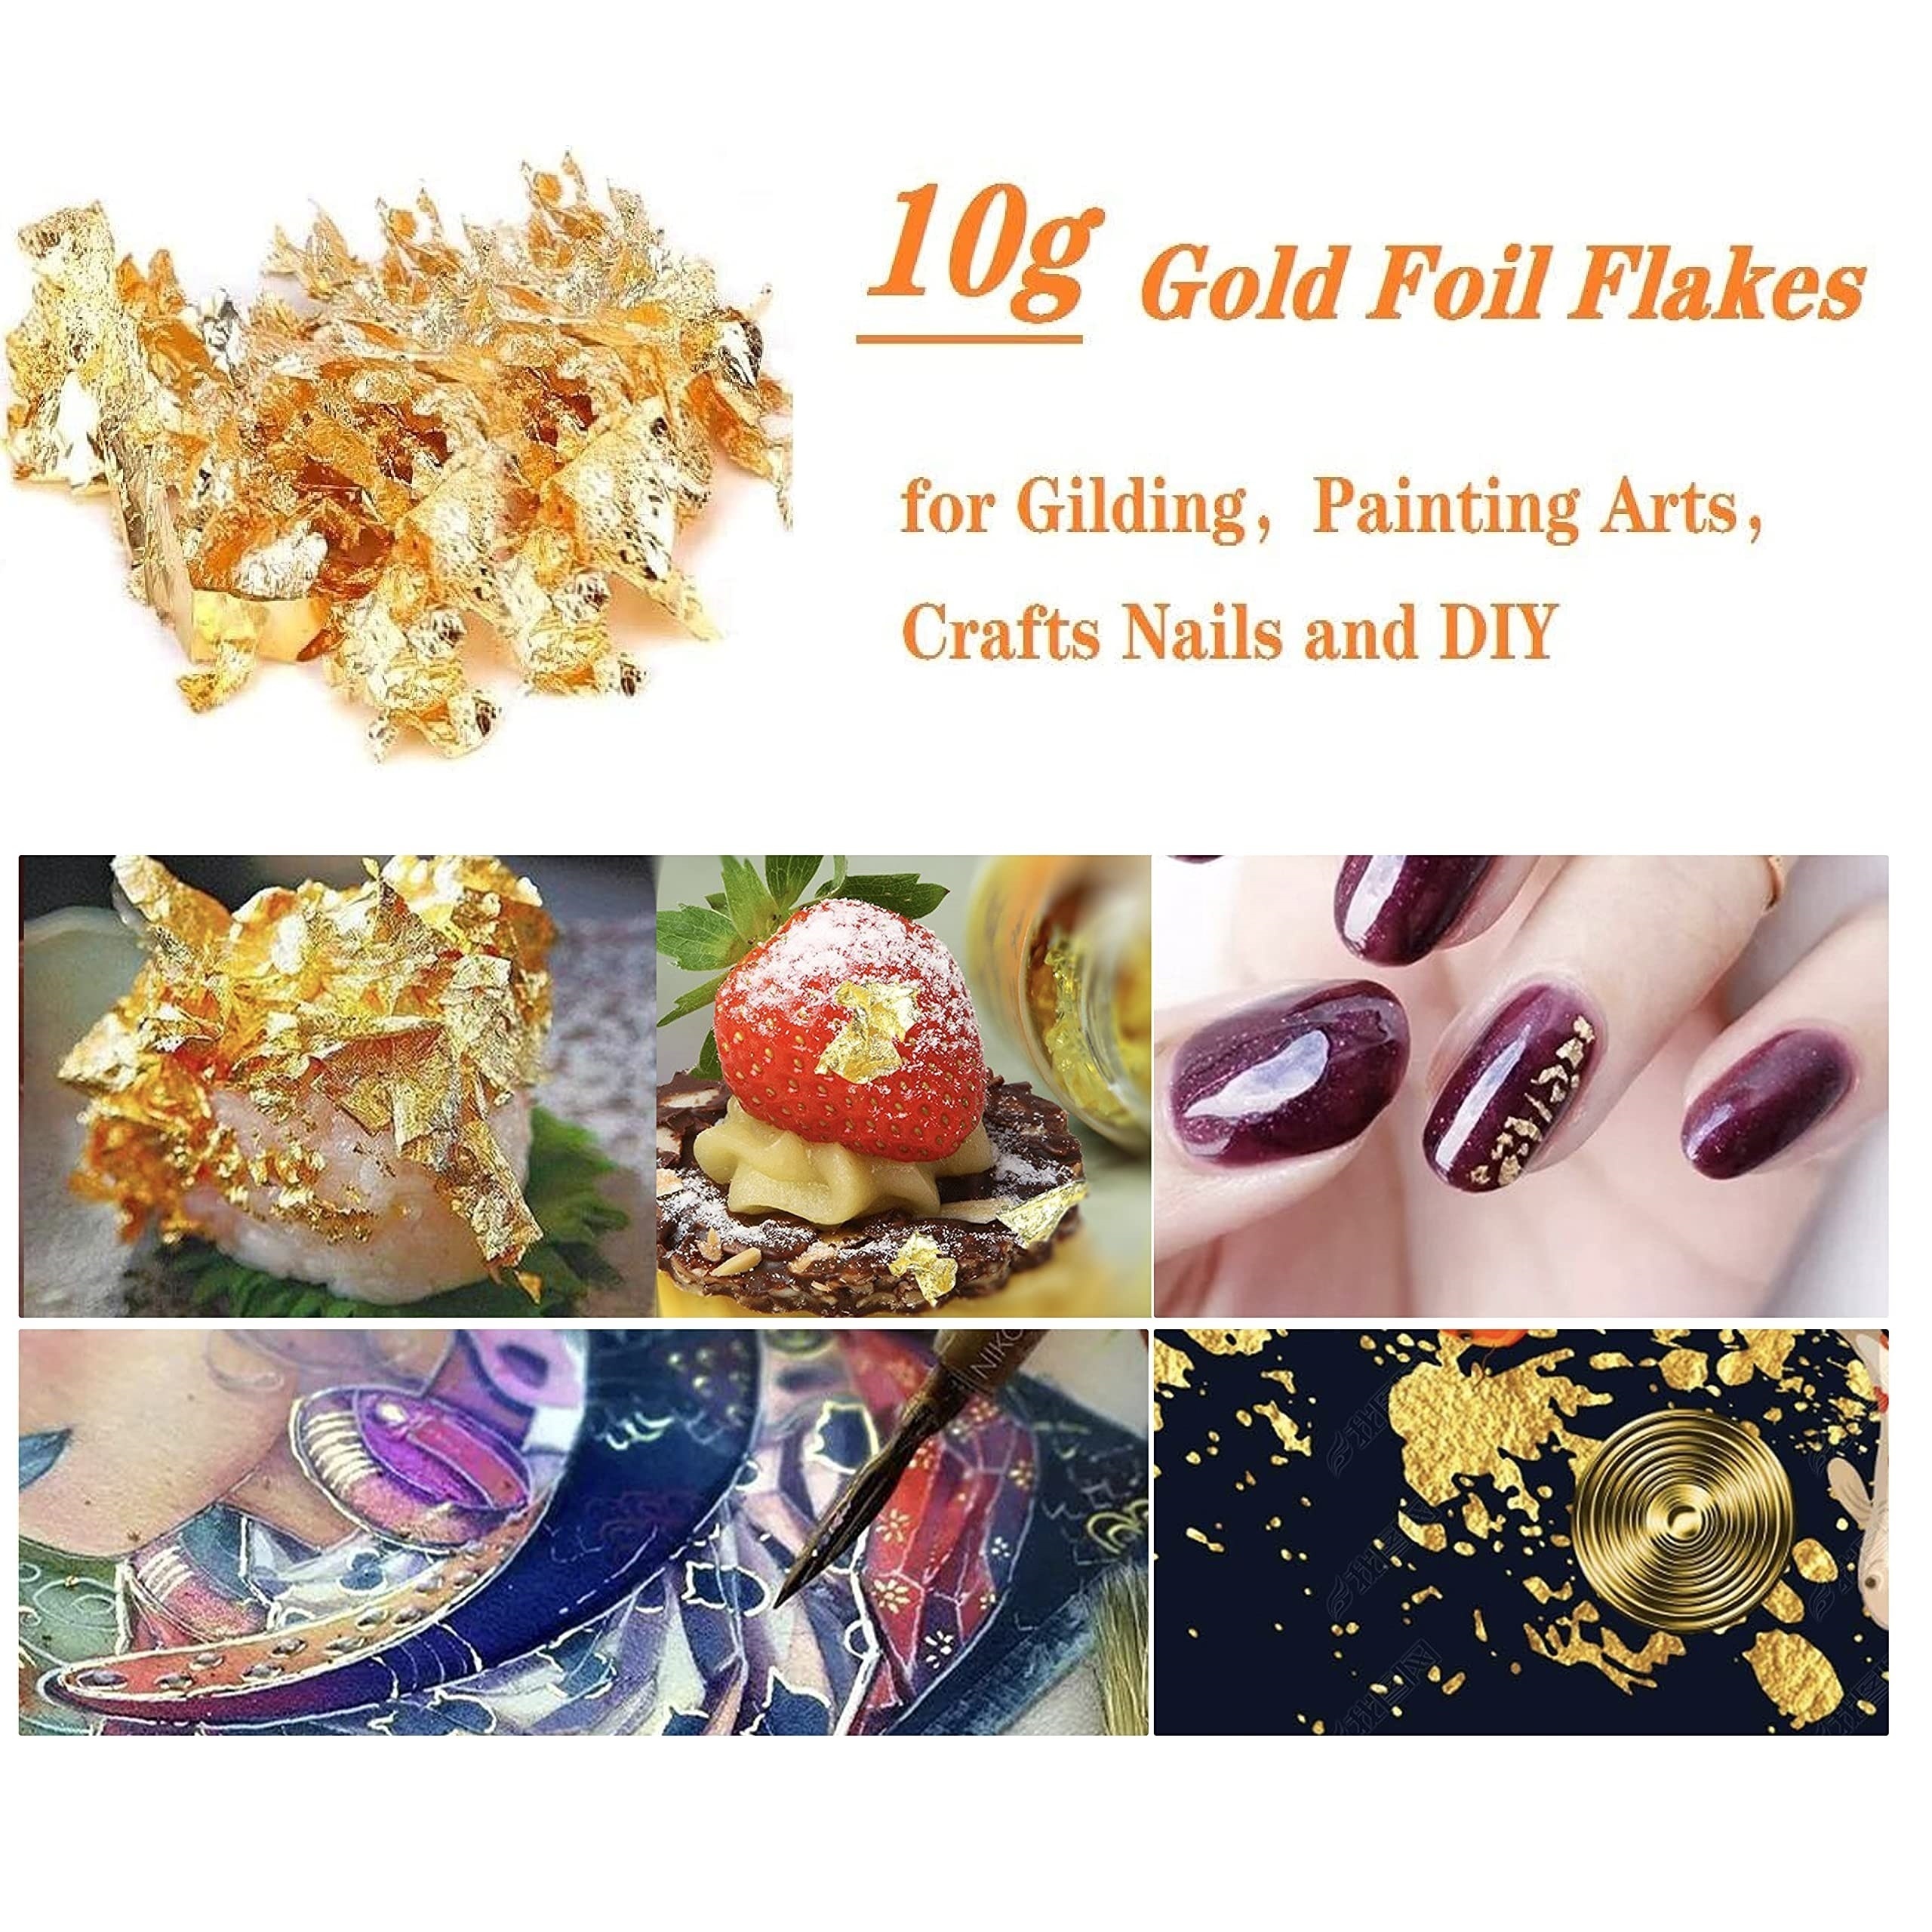 Rahat and Sons Rahat Crafts 10g Gold Flakes for Resin, Gold Foil for Nails & Gilding, Gold Foil Flakes Imitation Gold Leaf for Jewelry